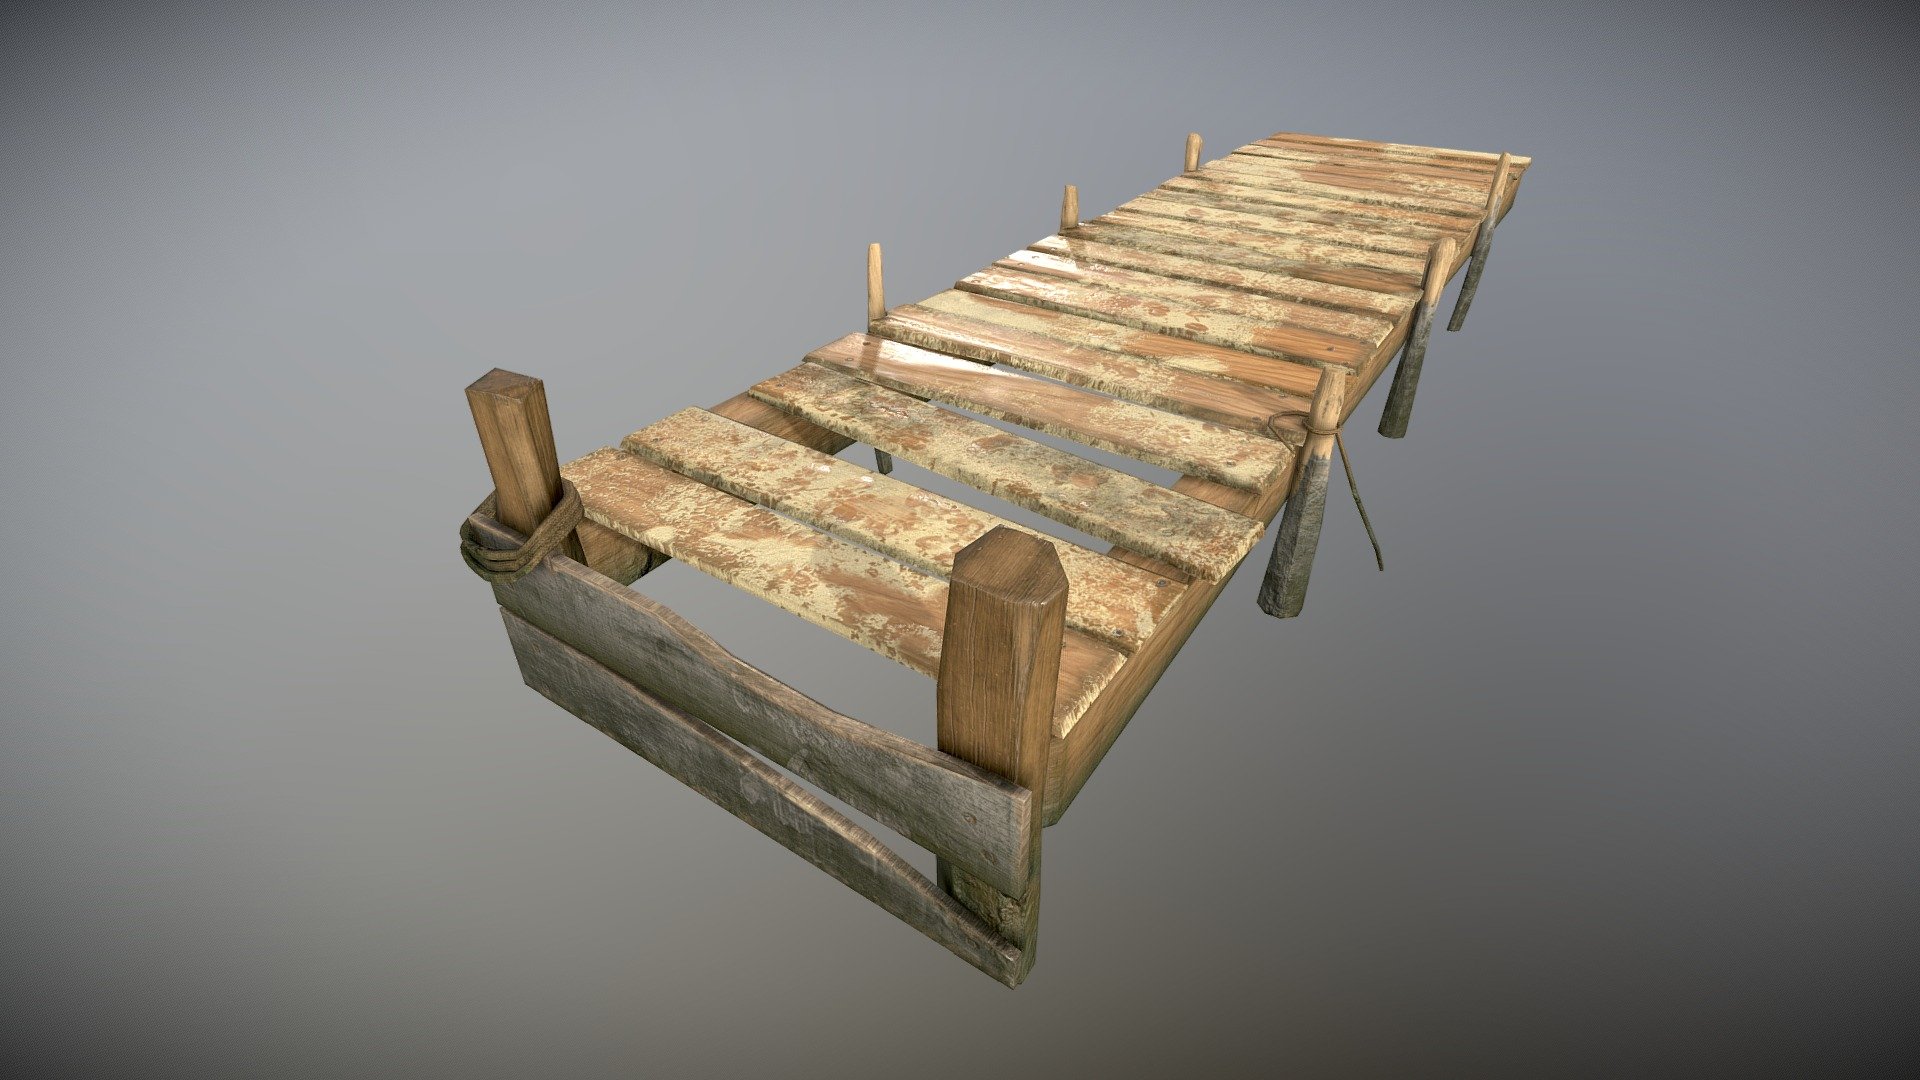 A low poly environmental piece that I made.

Textures are in 4K resolution and using the .png format.

The additonal file includes the 3ds Max scene file containing the high and low poly models.

For more about this project: ArtStation - Old Wooden Pier - Buy Royalty Free 3D model by Emiel (@Emiel97) 3d model